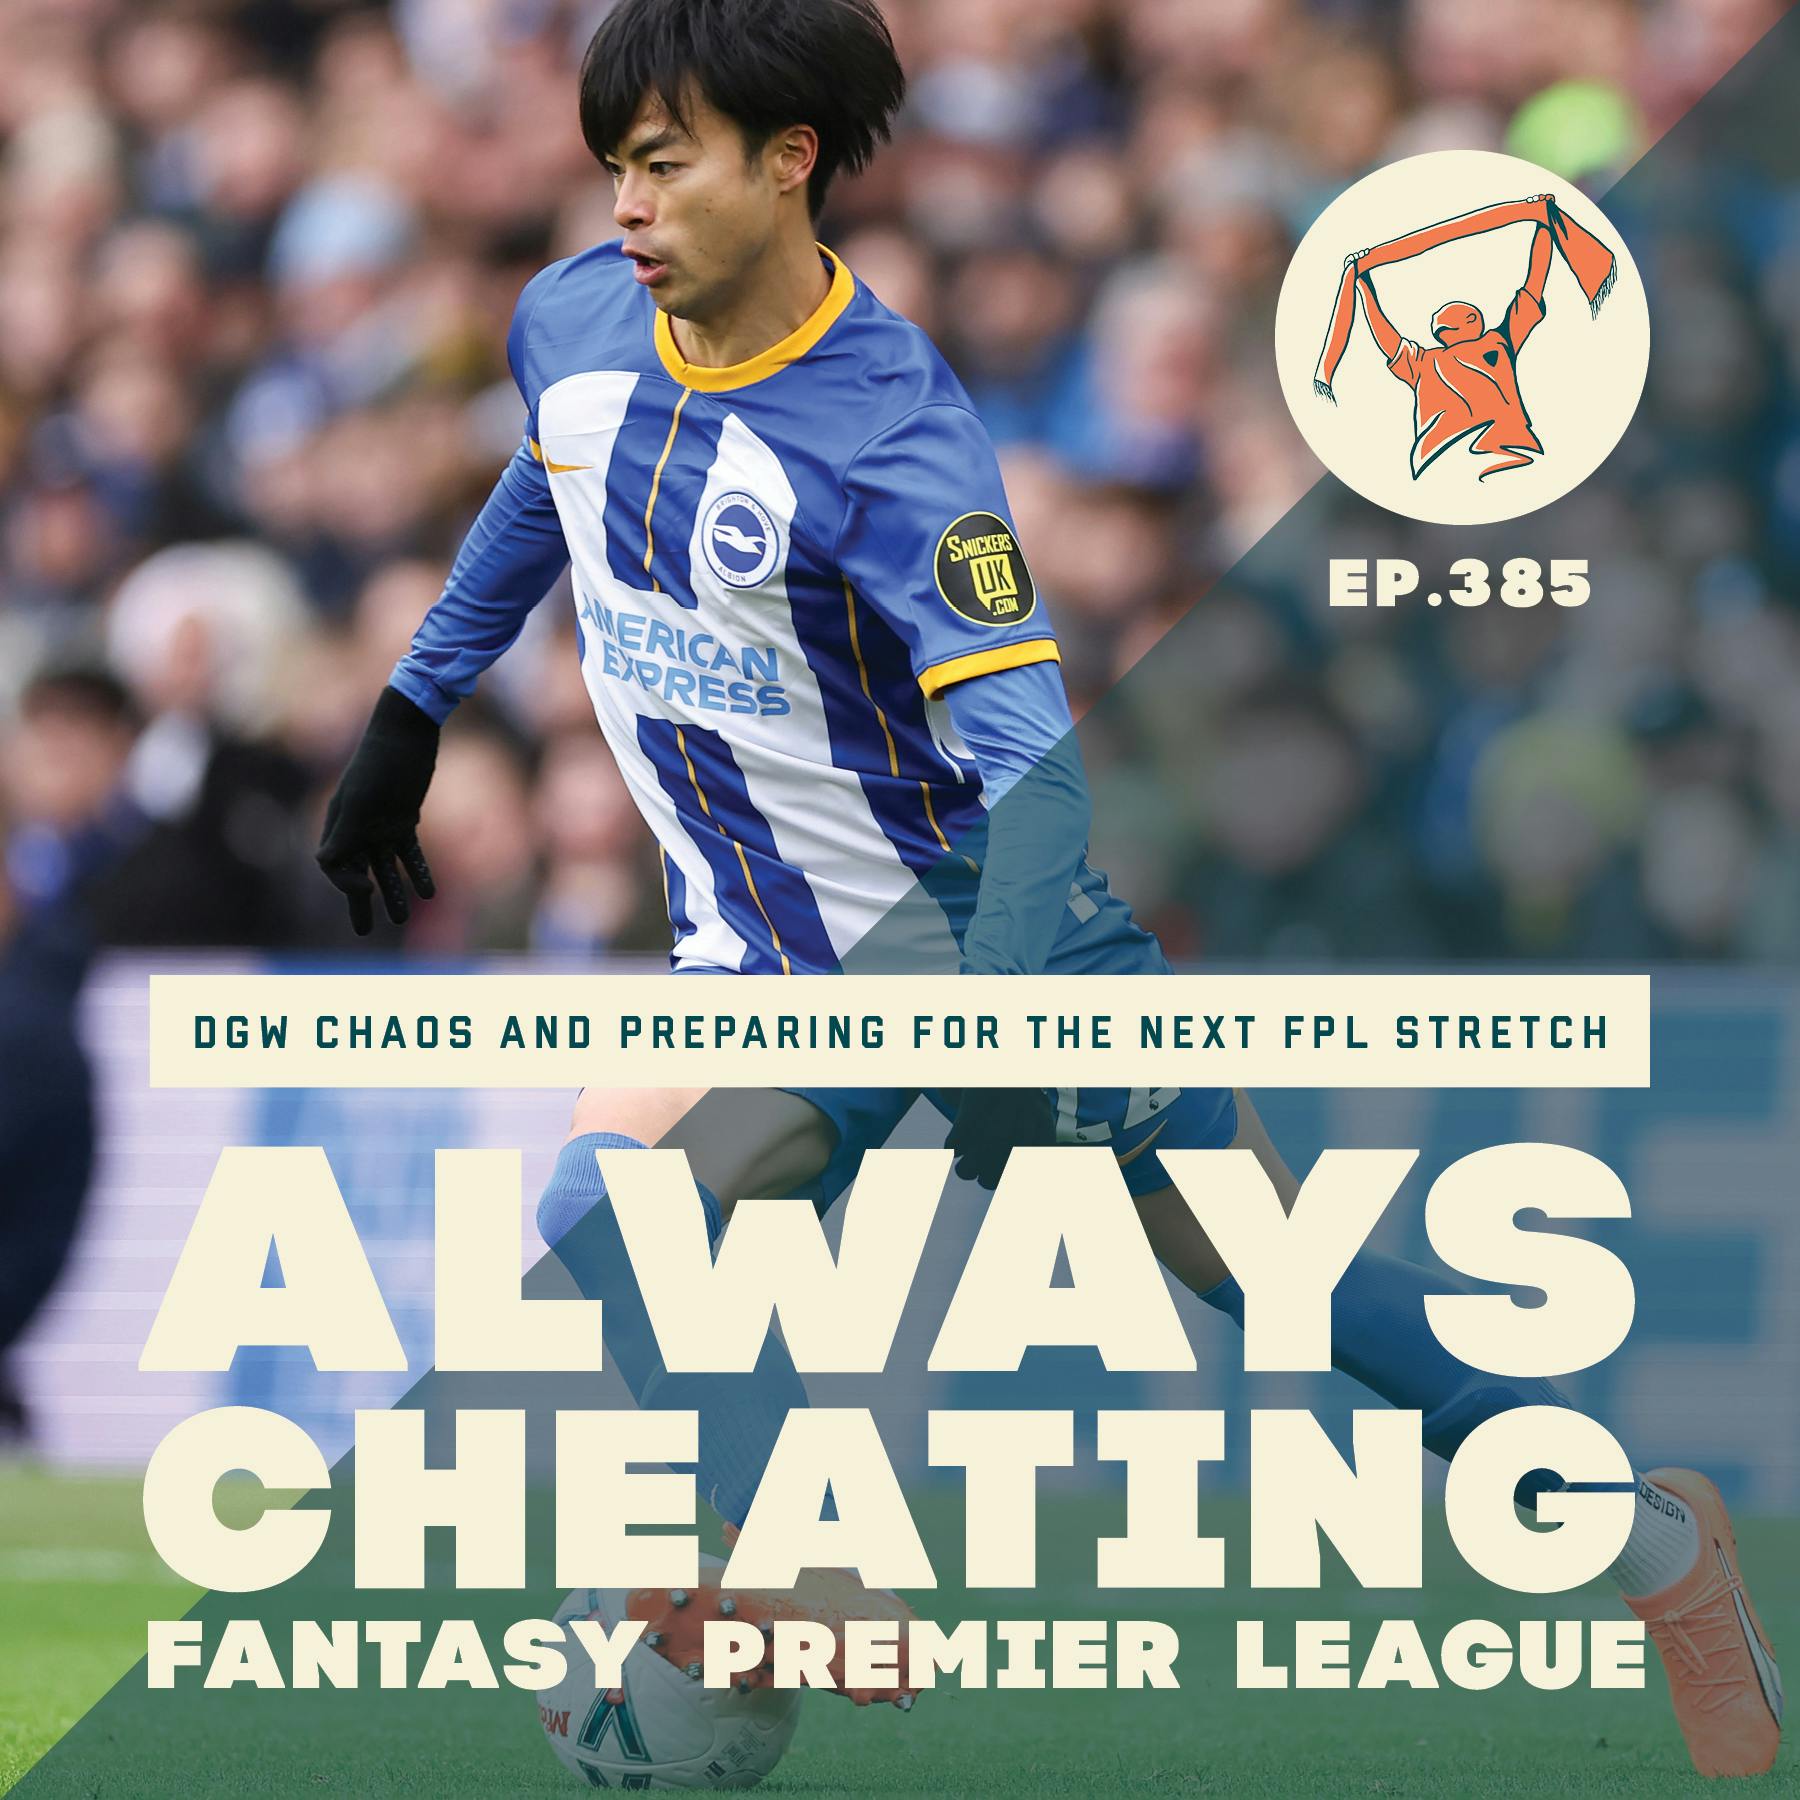 Double Gameweek Chaos & Preparing for the Next FPL Stretch